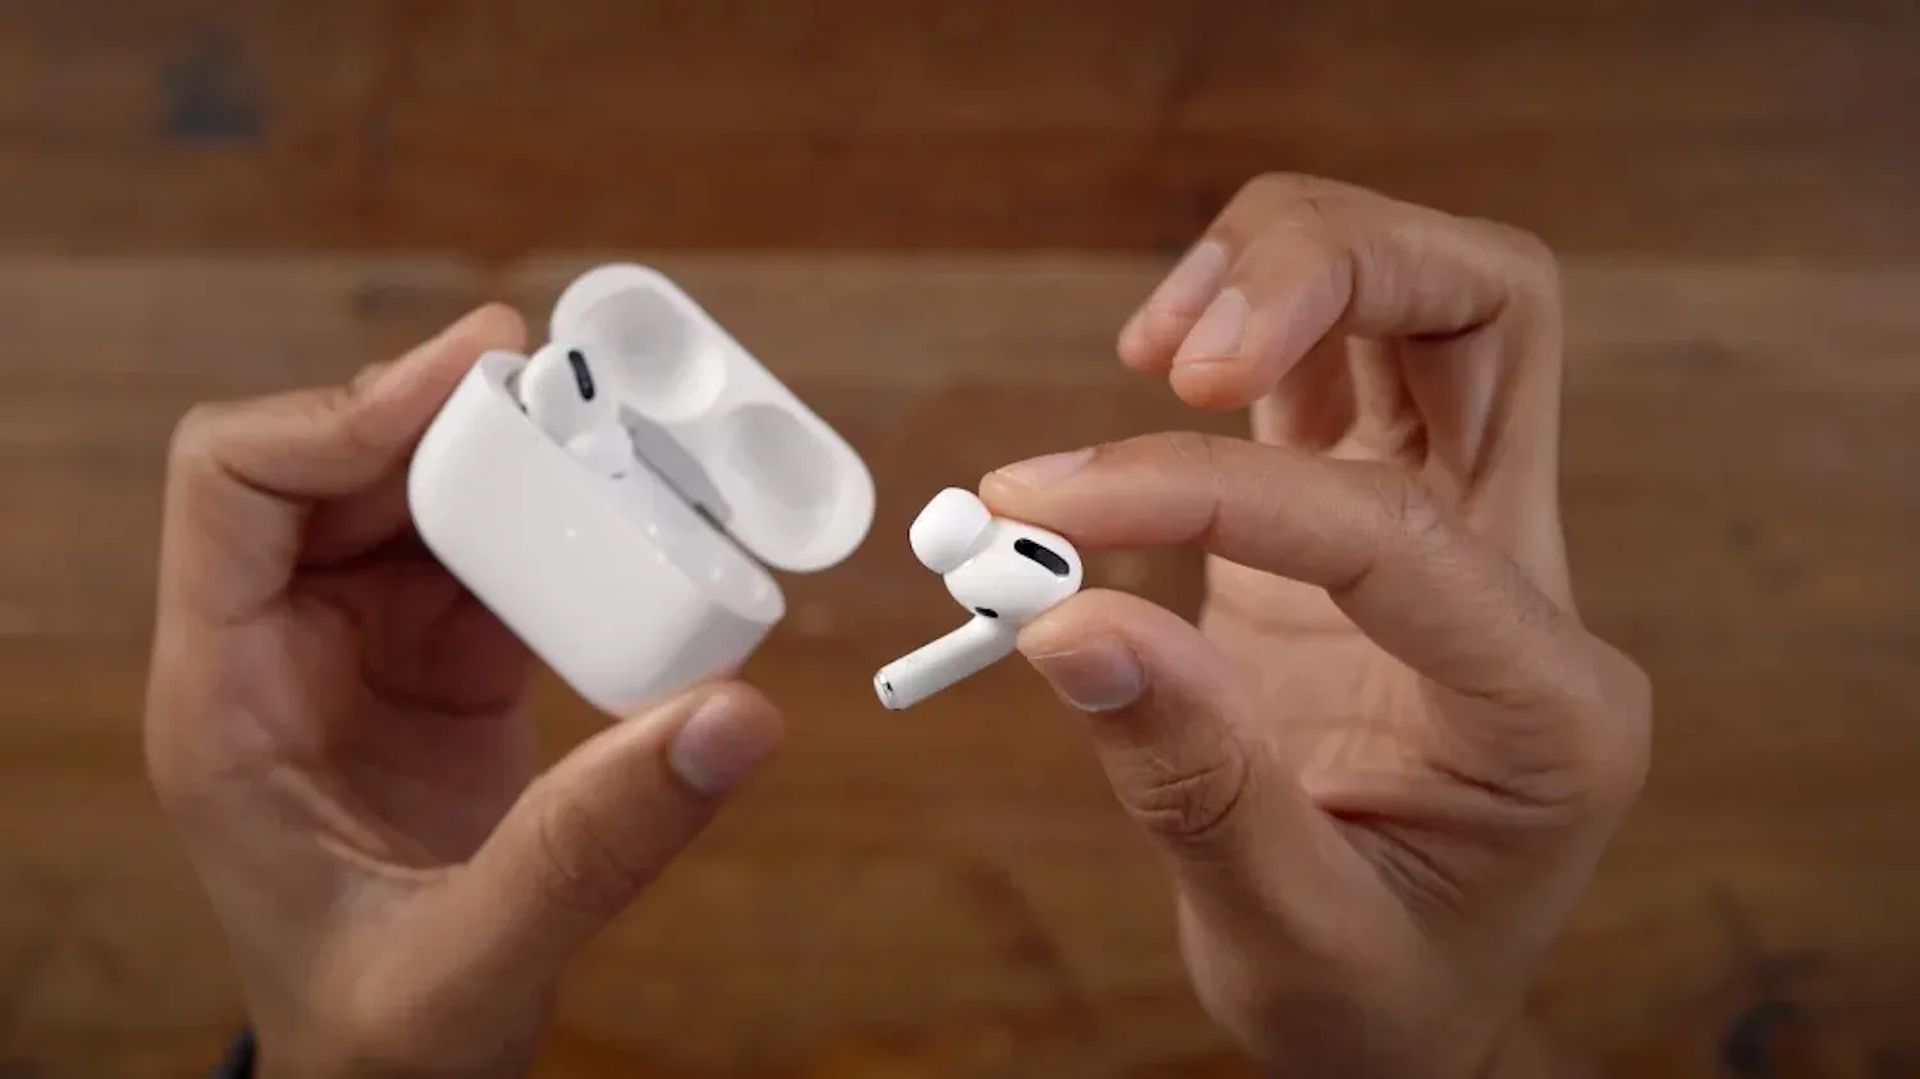 In this article, we are going to be covering how to fix iOS 16 AirPods not working, so you can continue using your headphones without any issues.